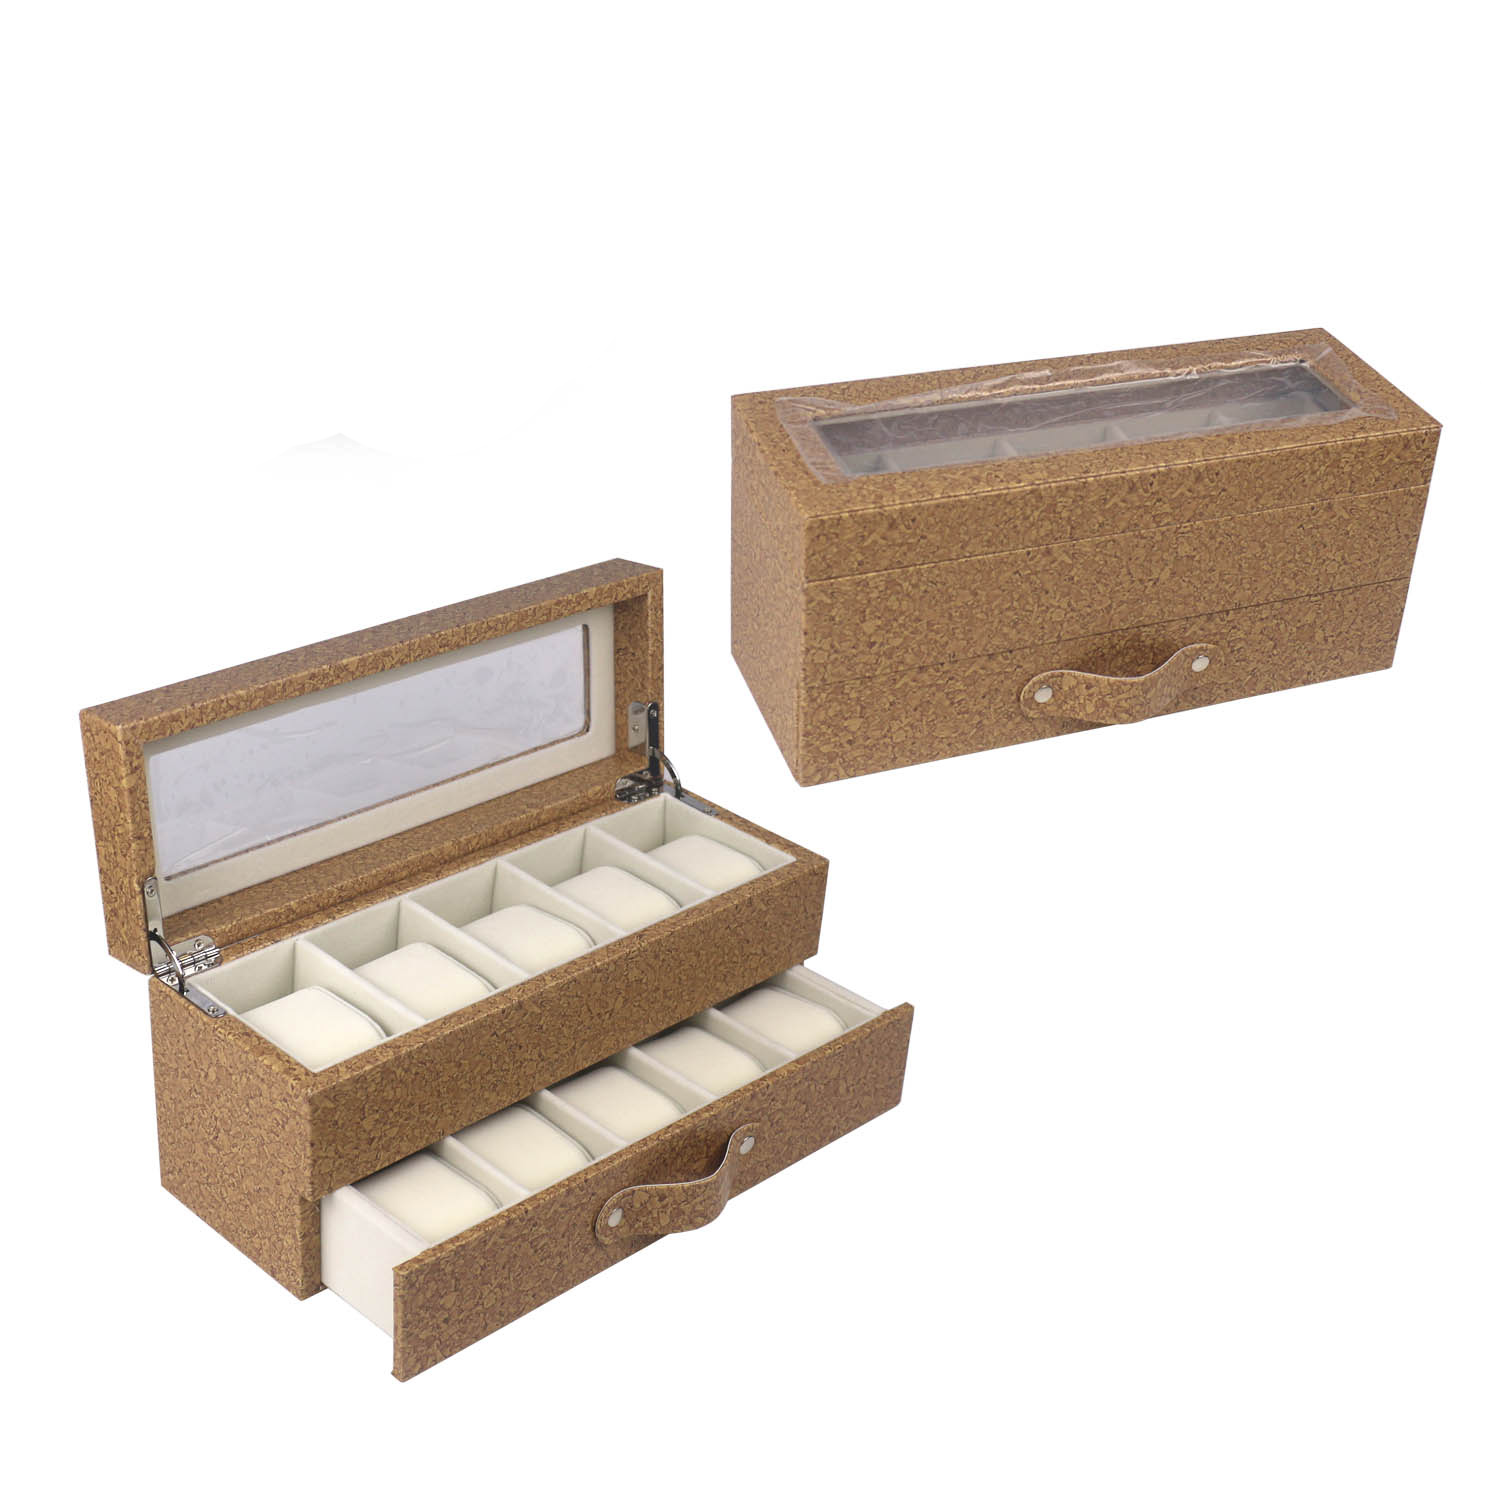 High Quality Watch Box Packaging Excellent Wood / Leather /Paper Board 